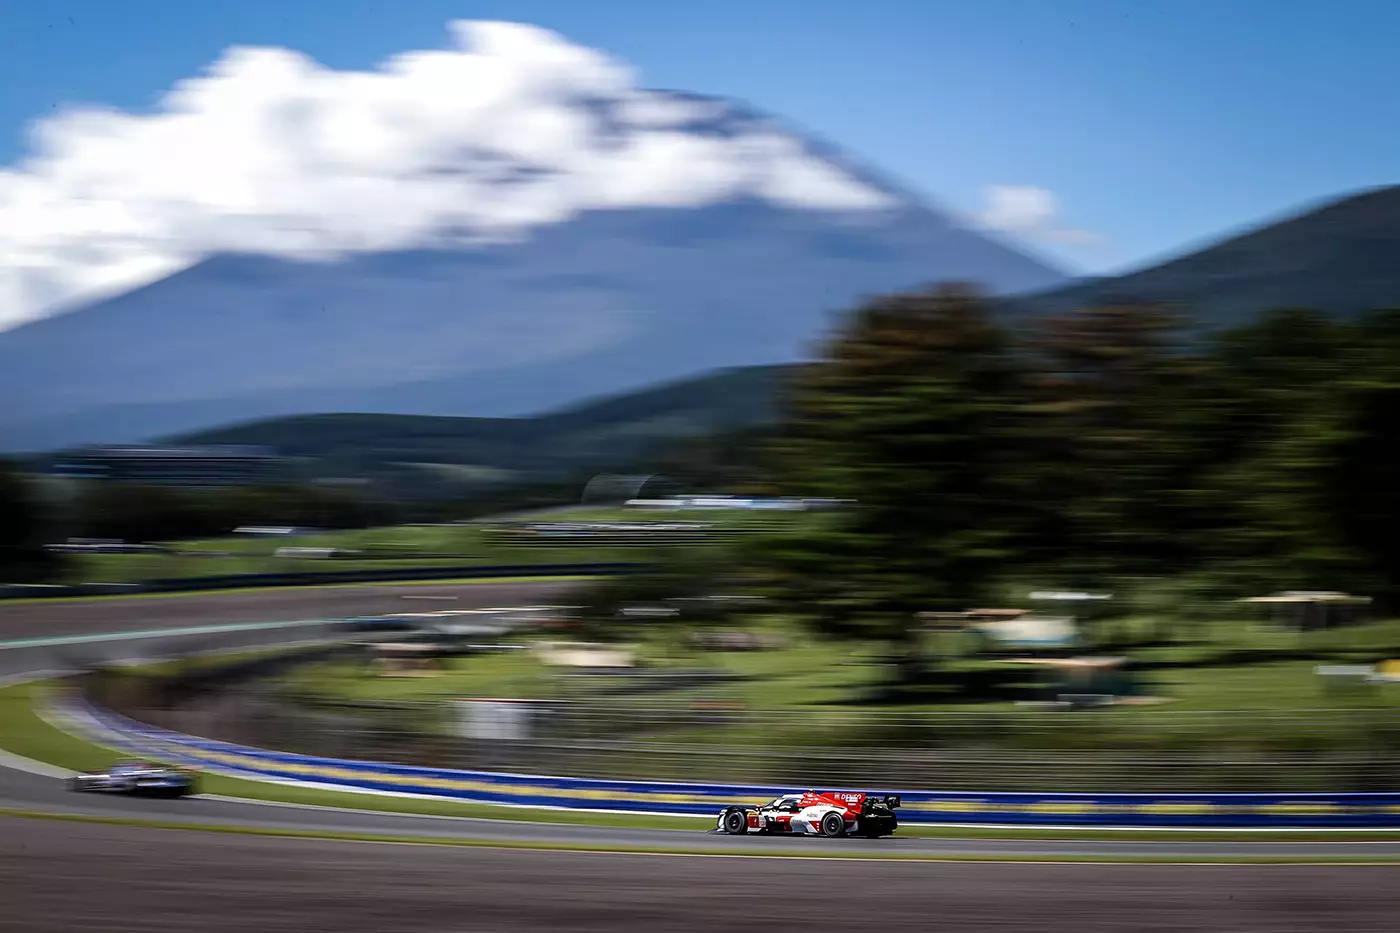 TOYOTA GAZOO Racing earned a thrilling one-two victory in the 6 Hours of Fuji